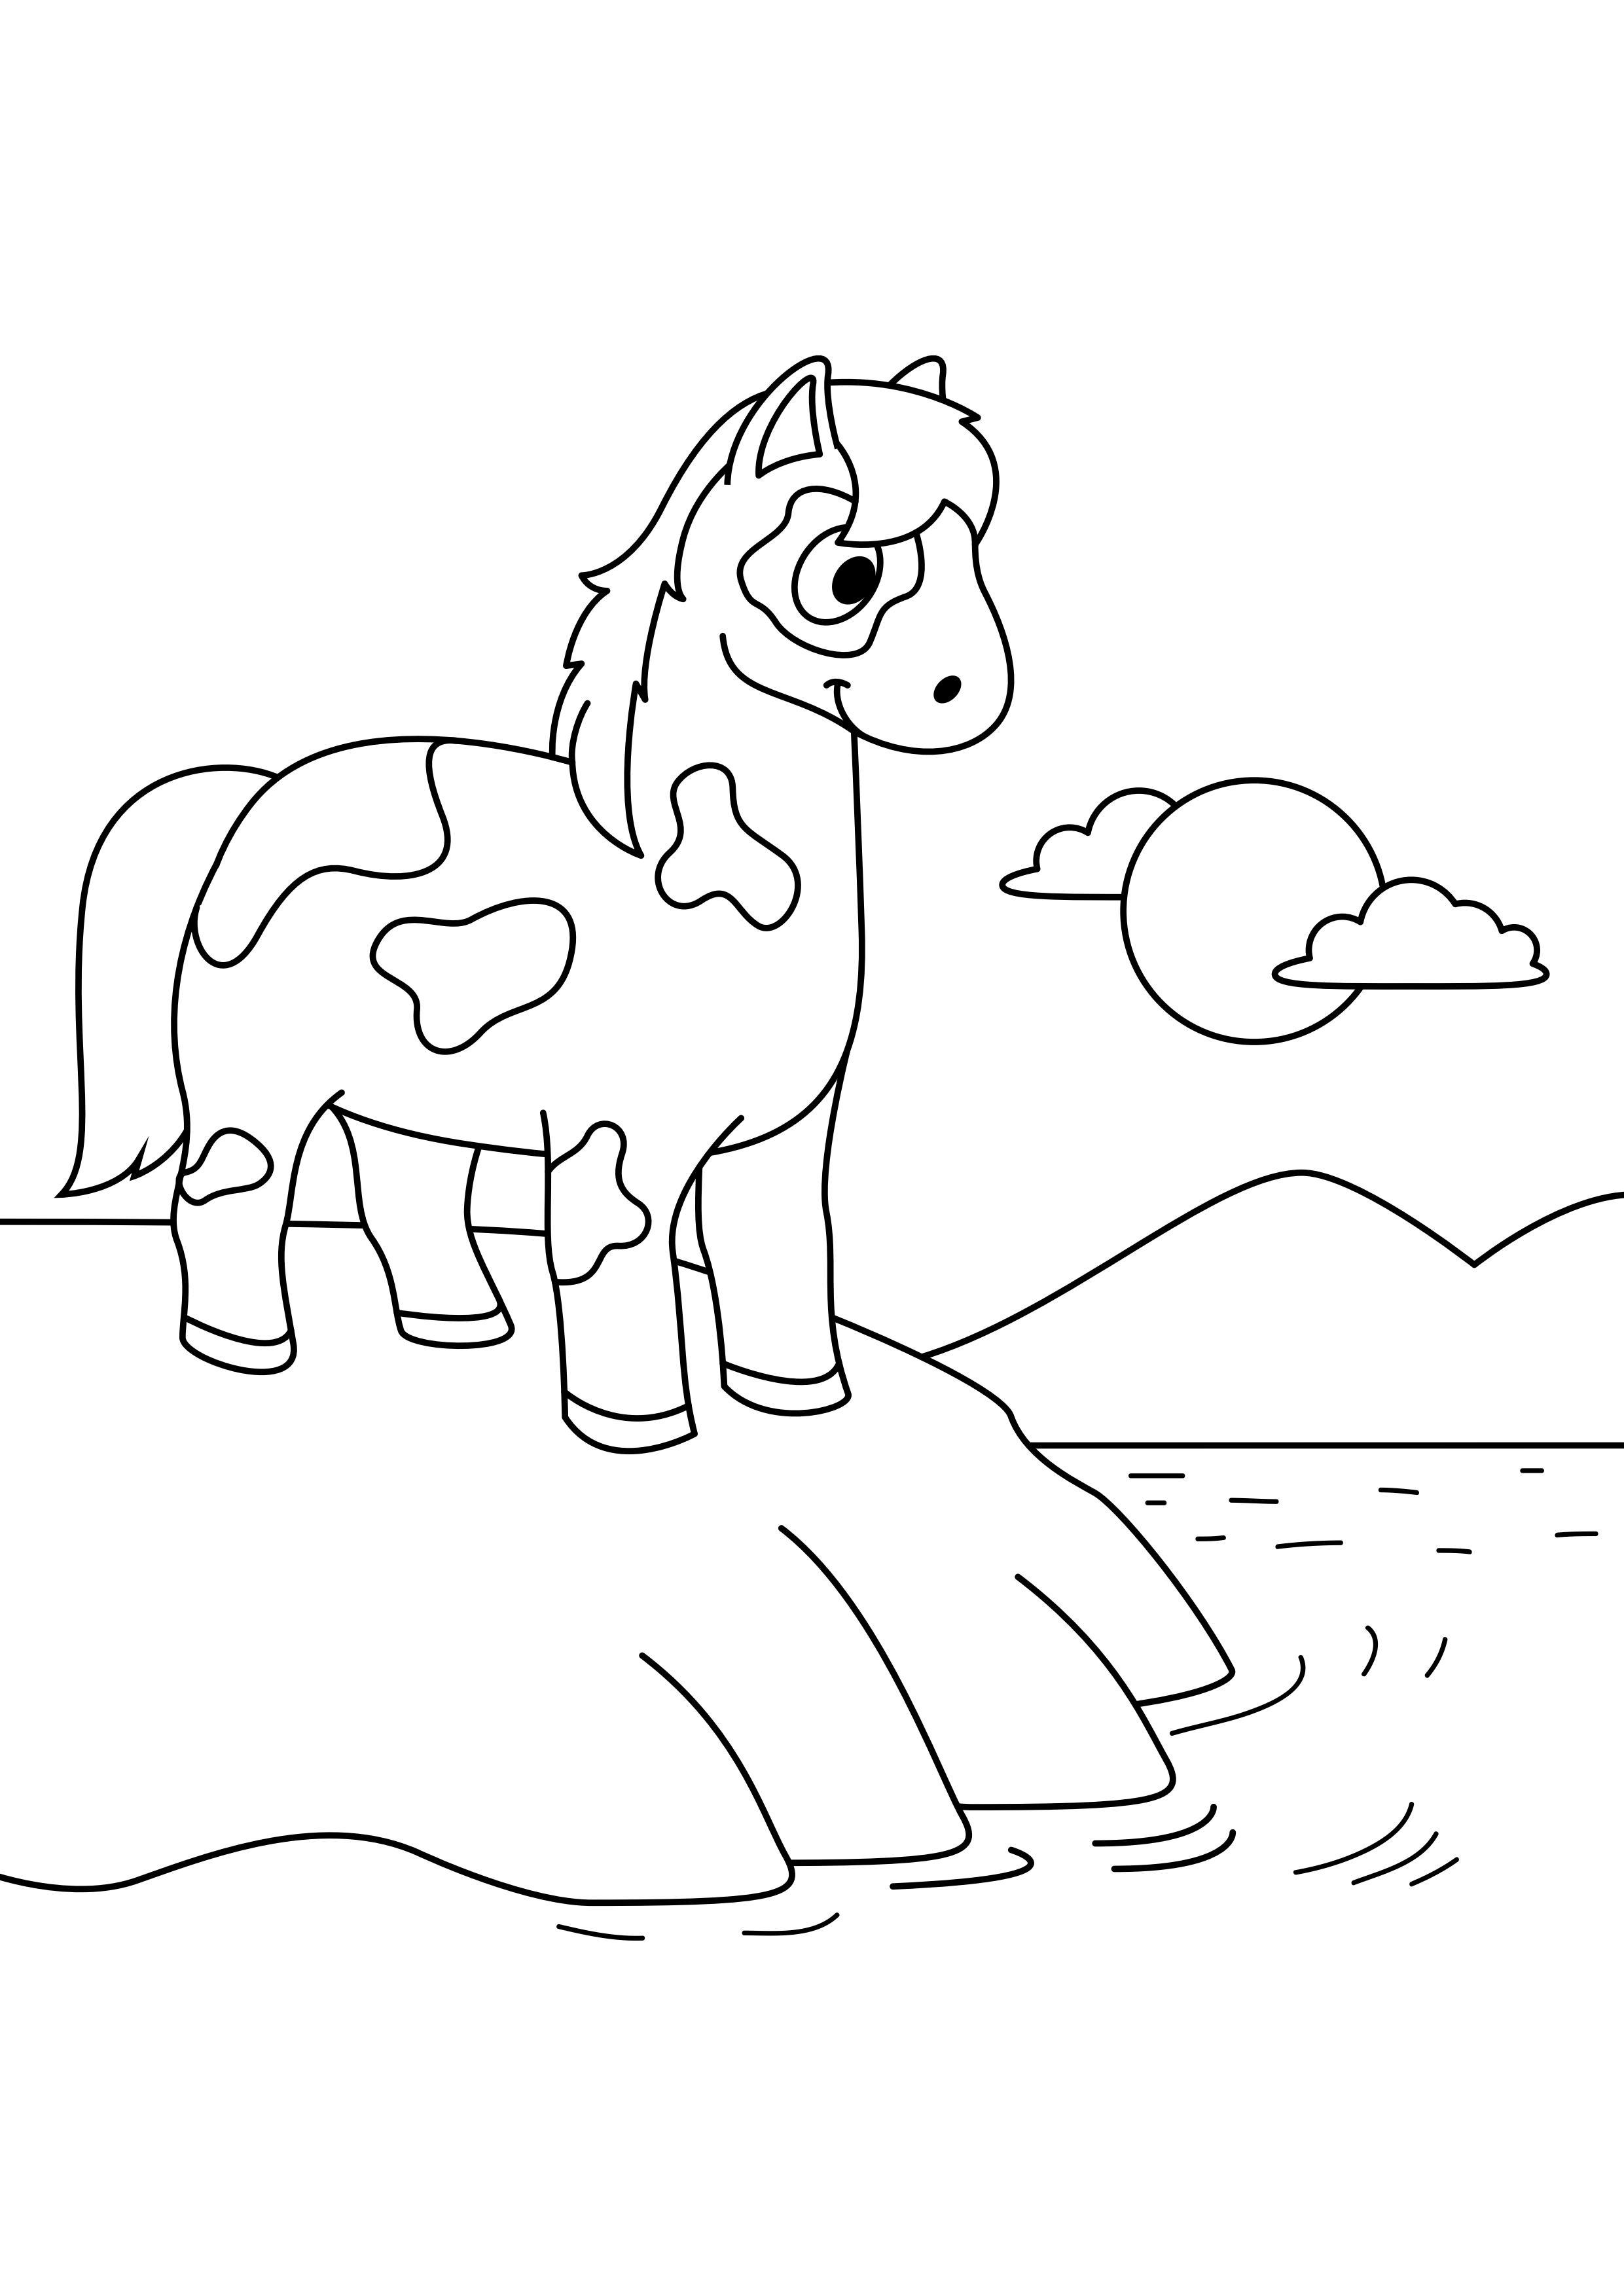 Coloring page horse on the water